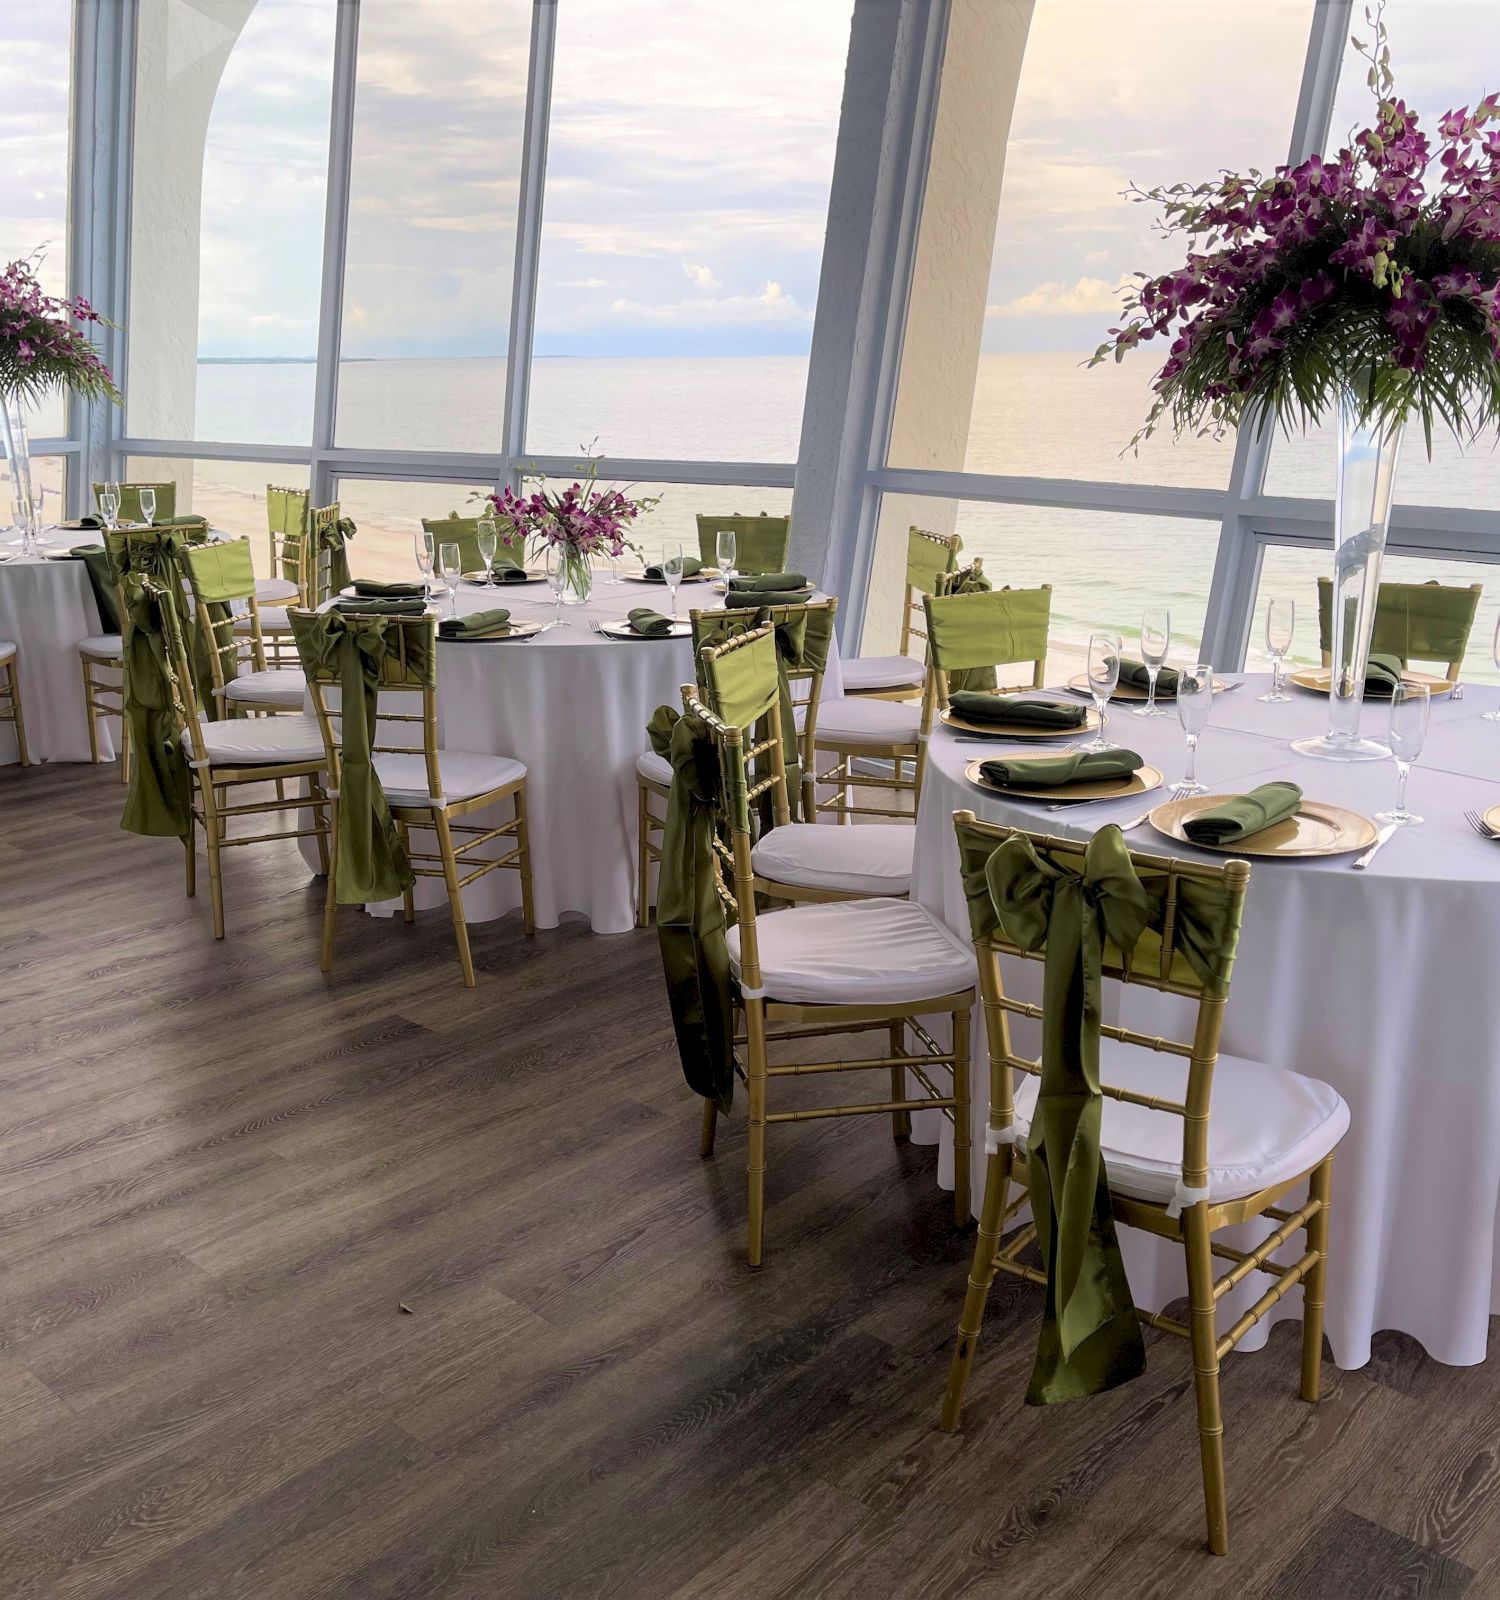 Elegant dining setup in a room with large windows, round tables with white tablecloths, green chairs, and tall floral centerpieces by the sea ending the sentence.